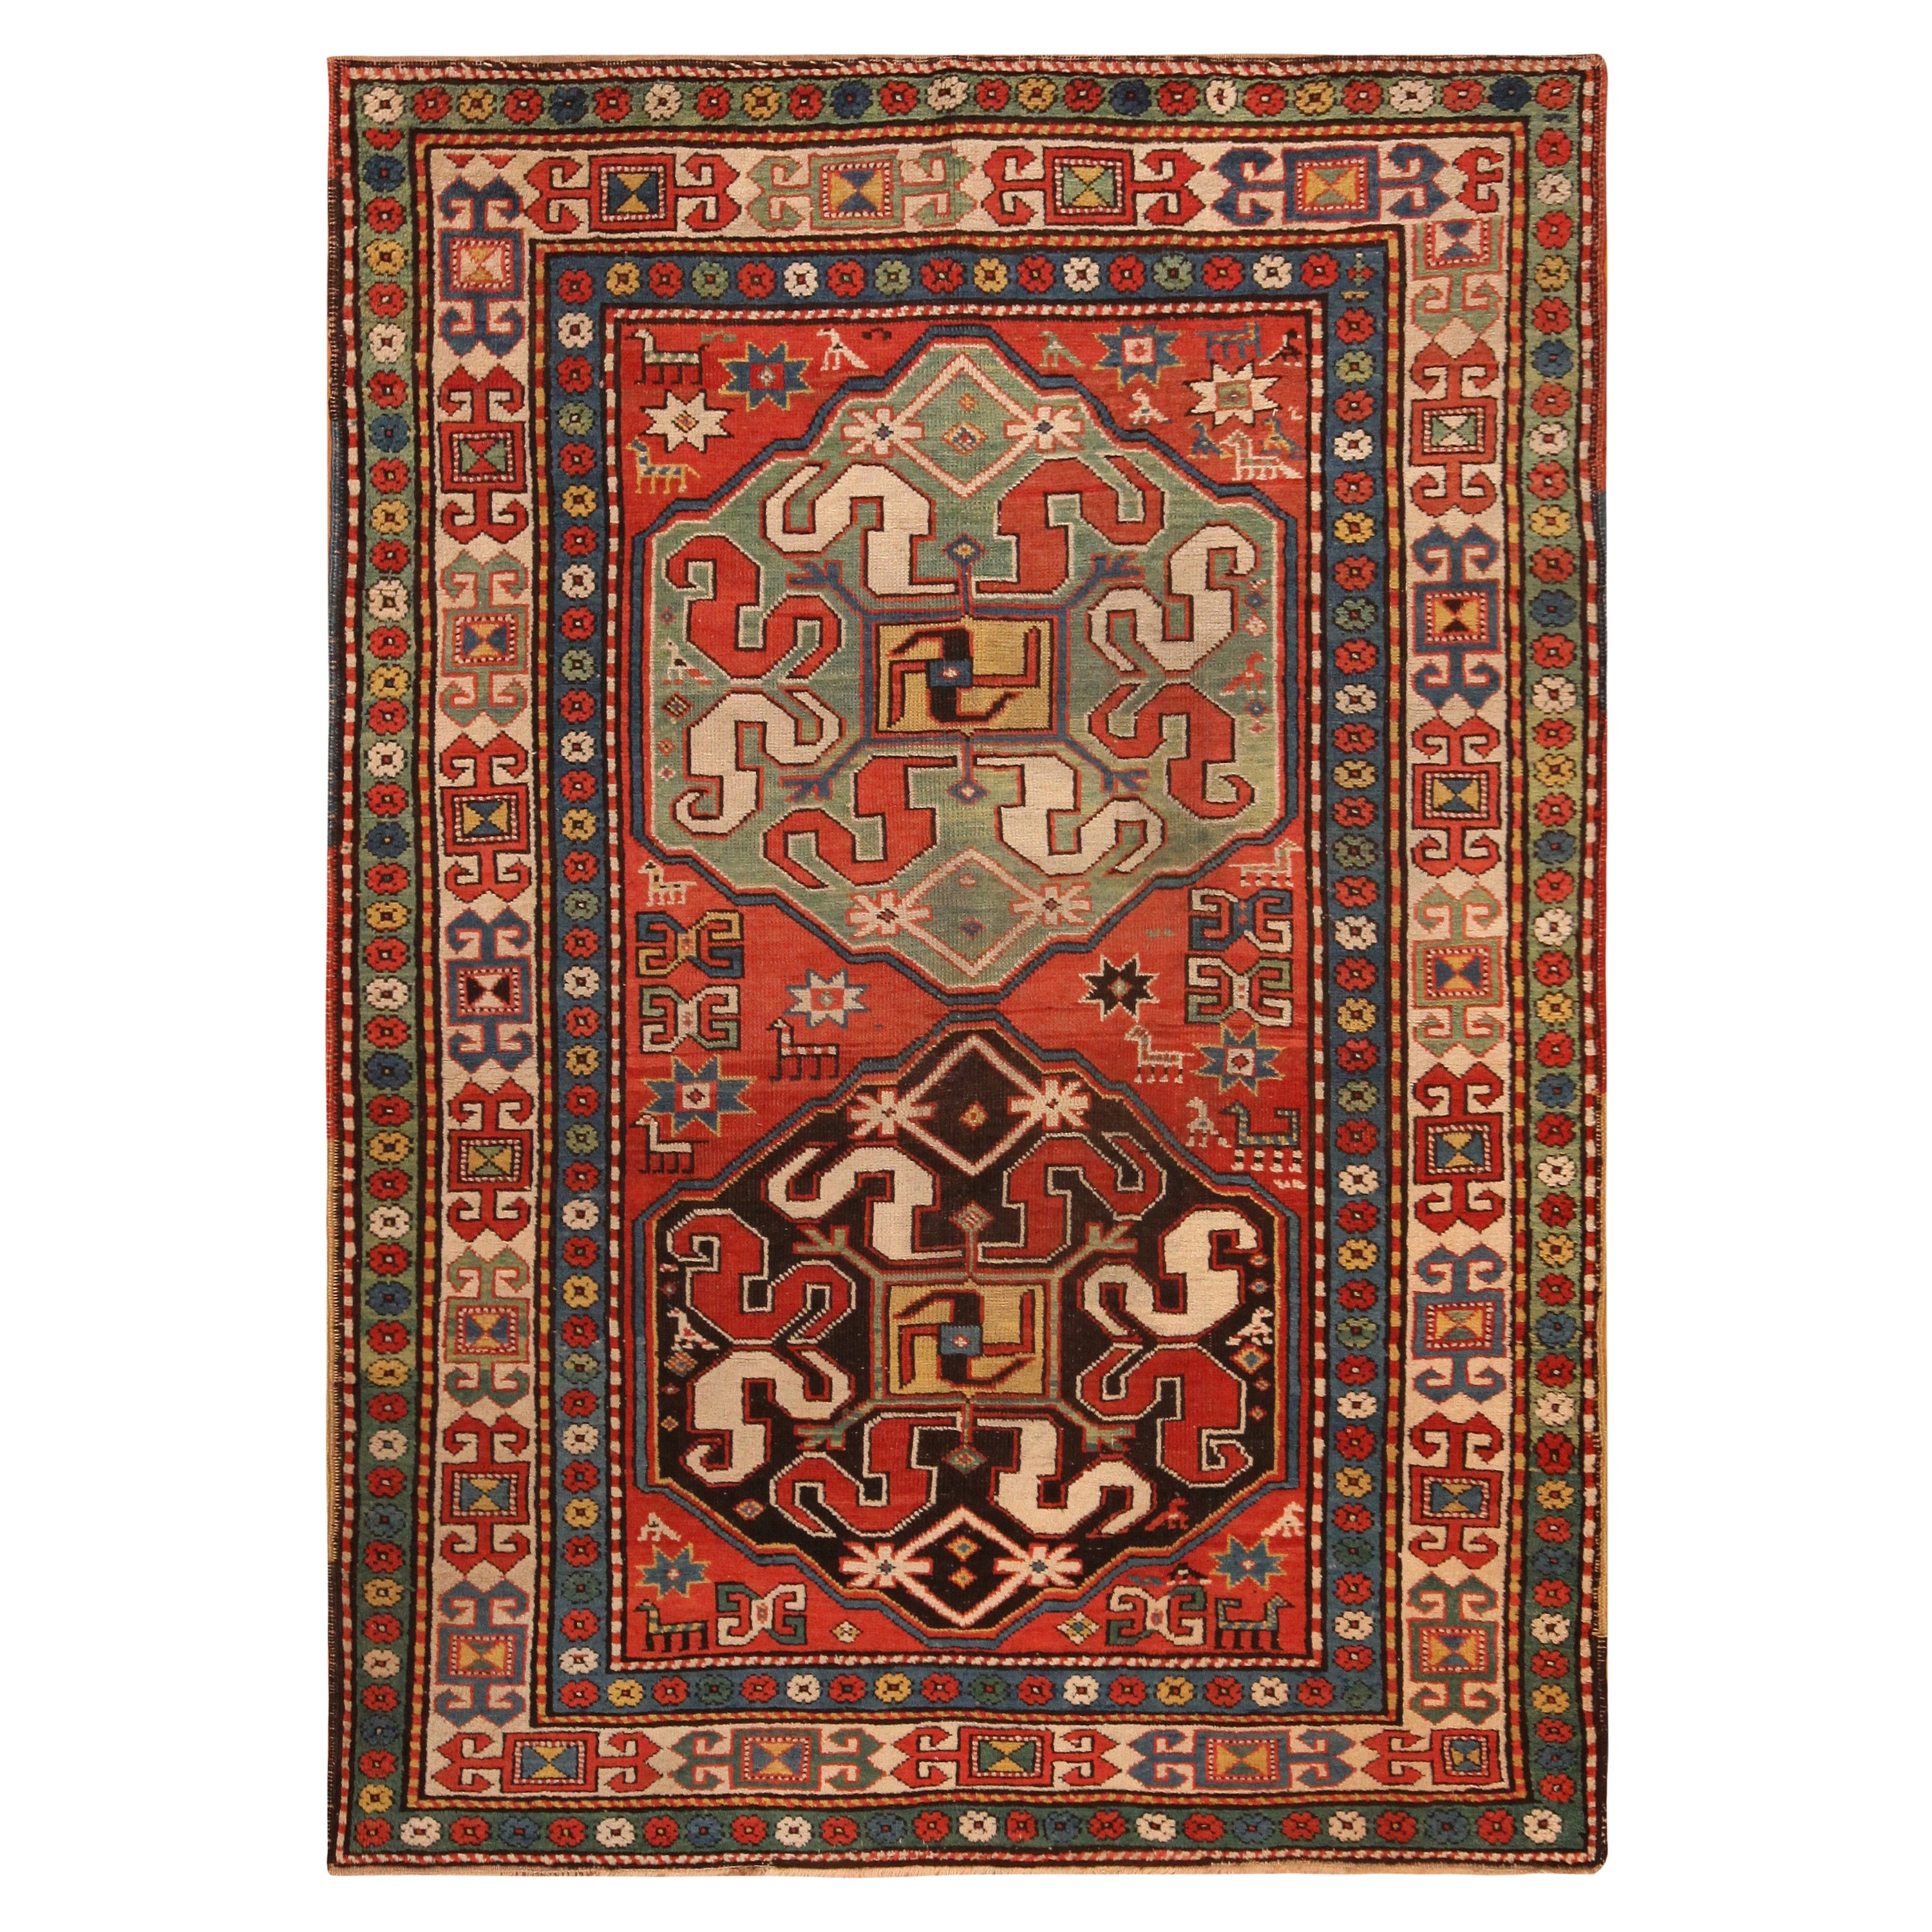 Nazmiyal Collection Antique Caucasian Tribal Kazak Rug. 4 ft 4 in x 6 ft 6 in